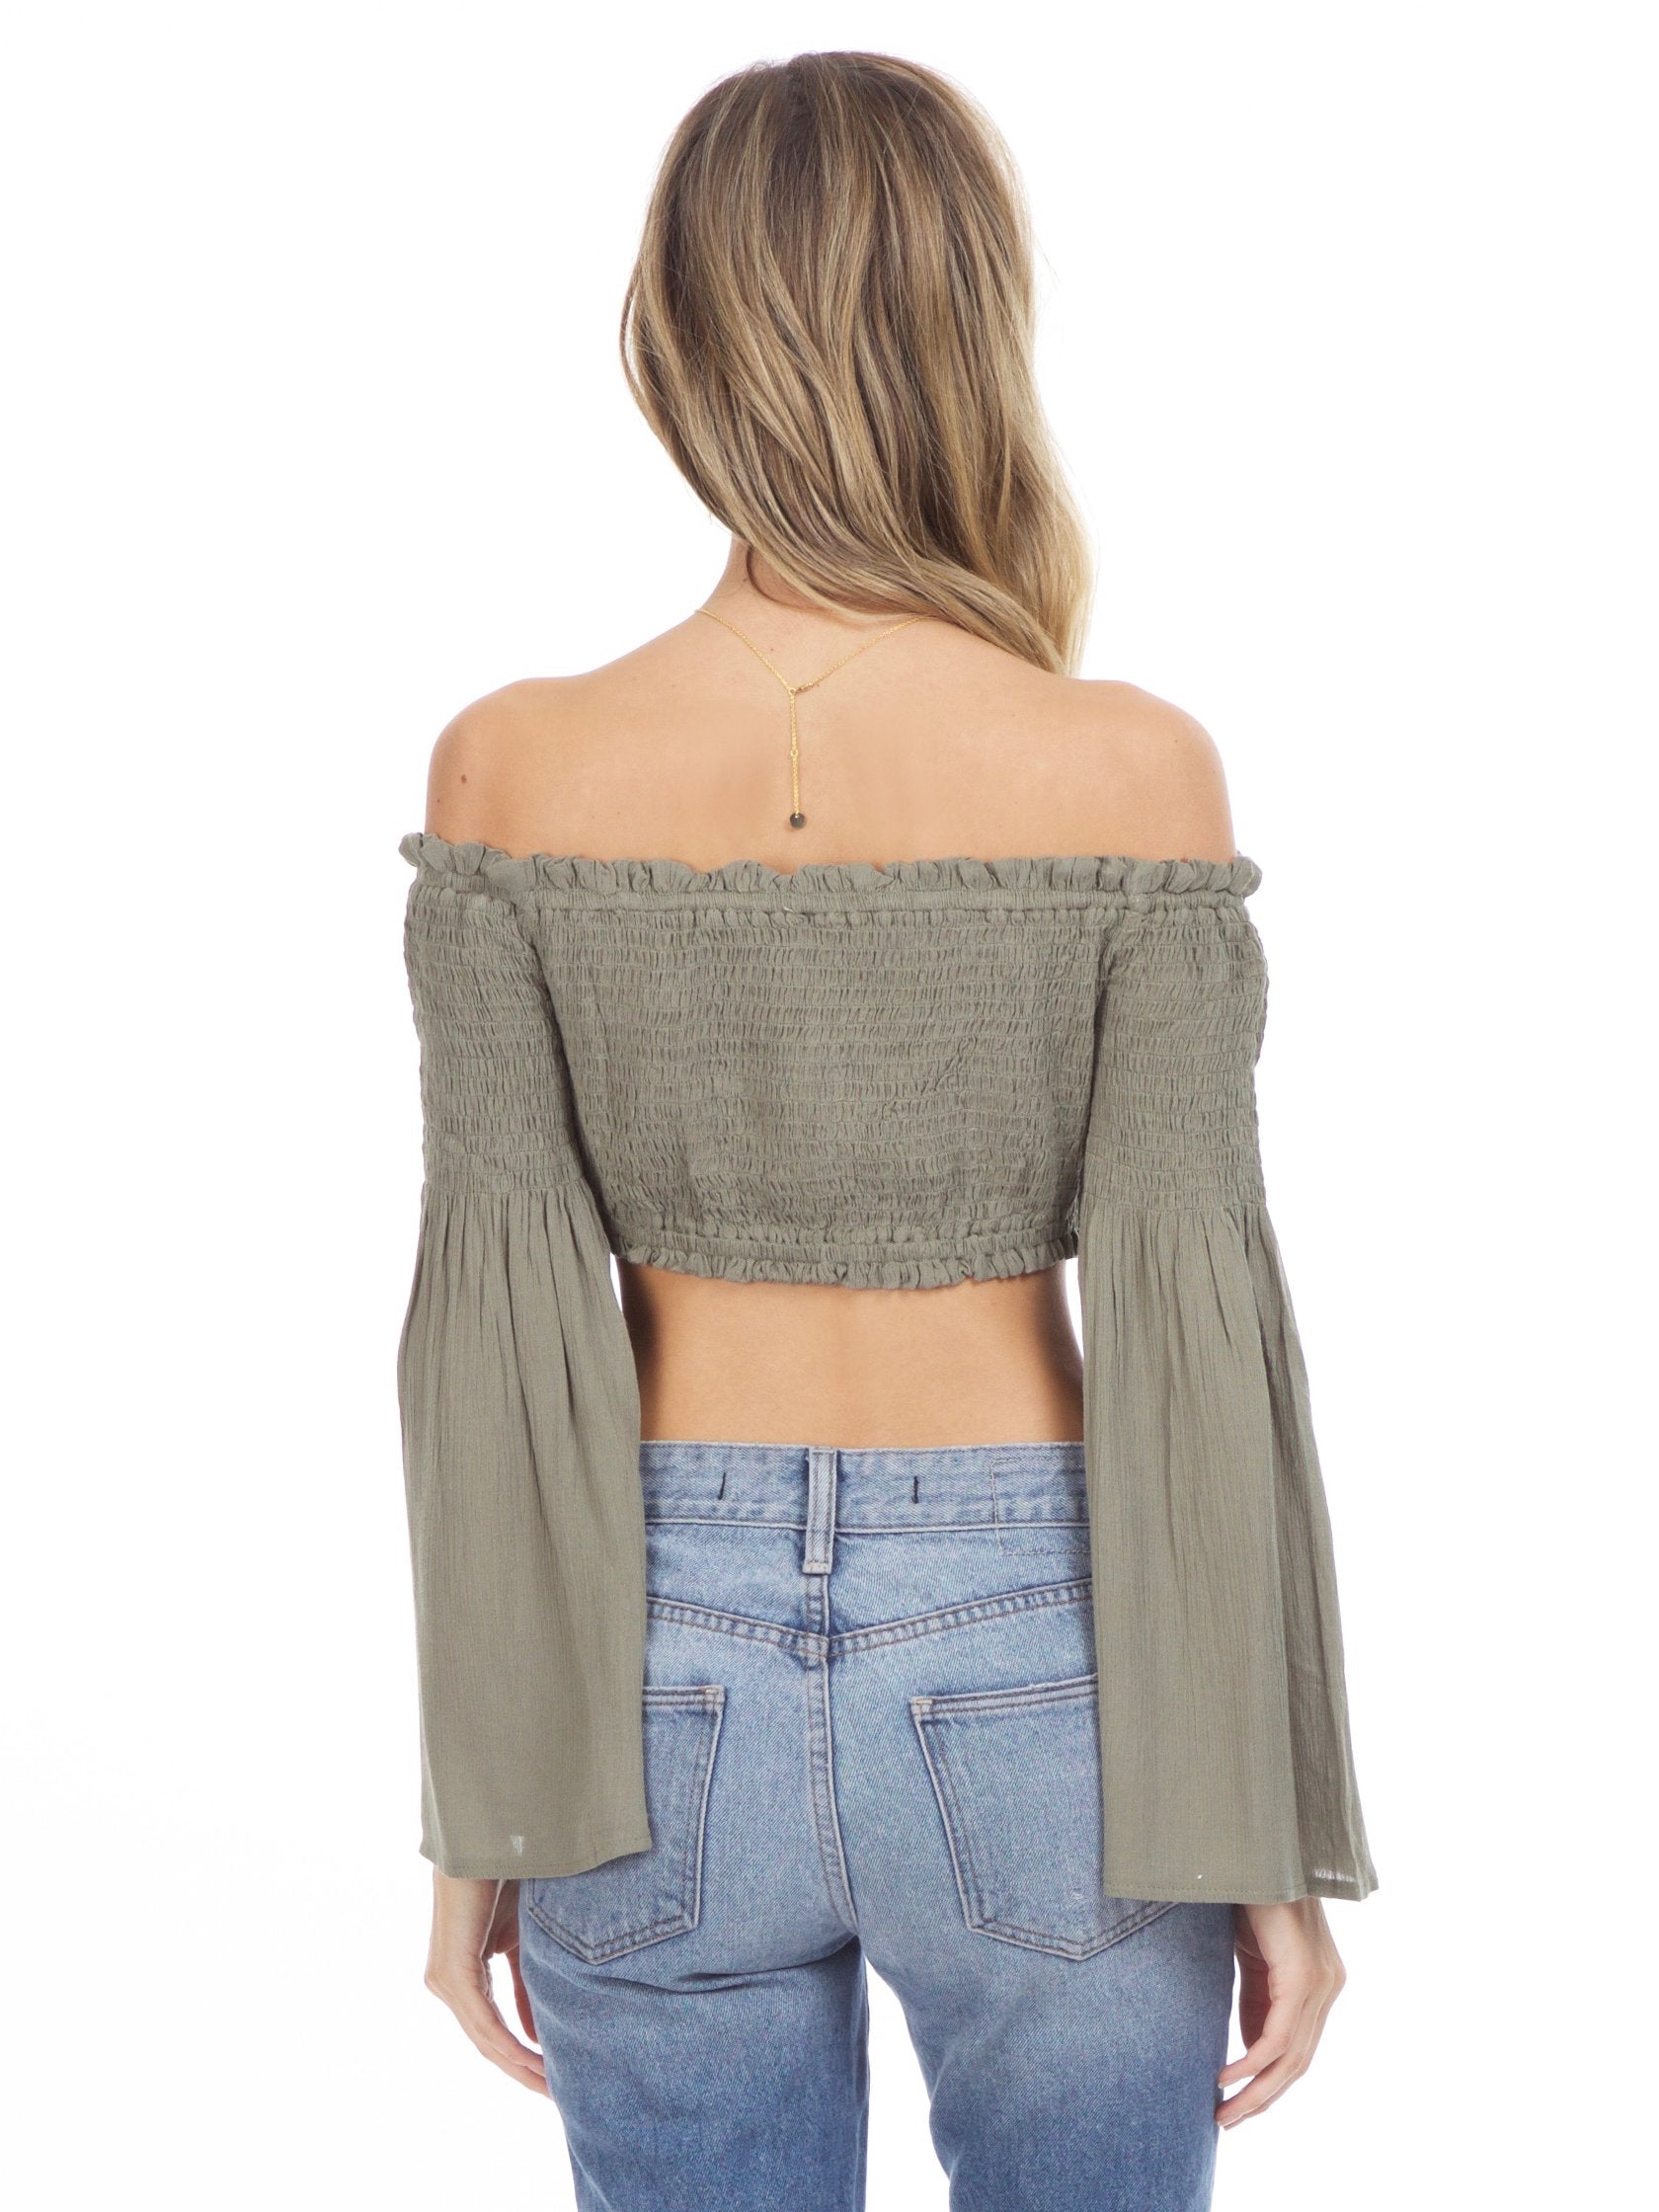 Women outfit in a top rental from Sadie & Sage called Olive Crop Top